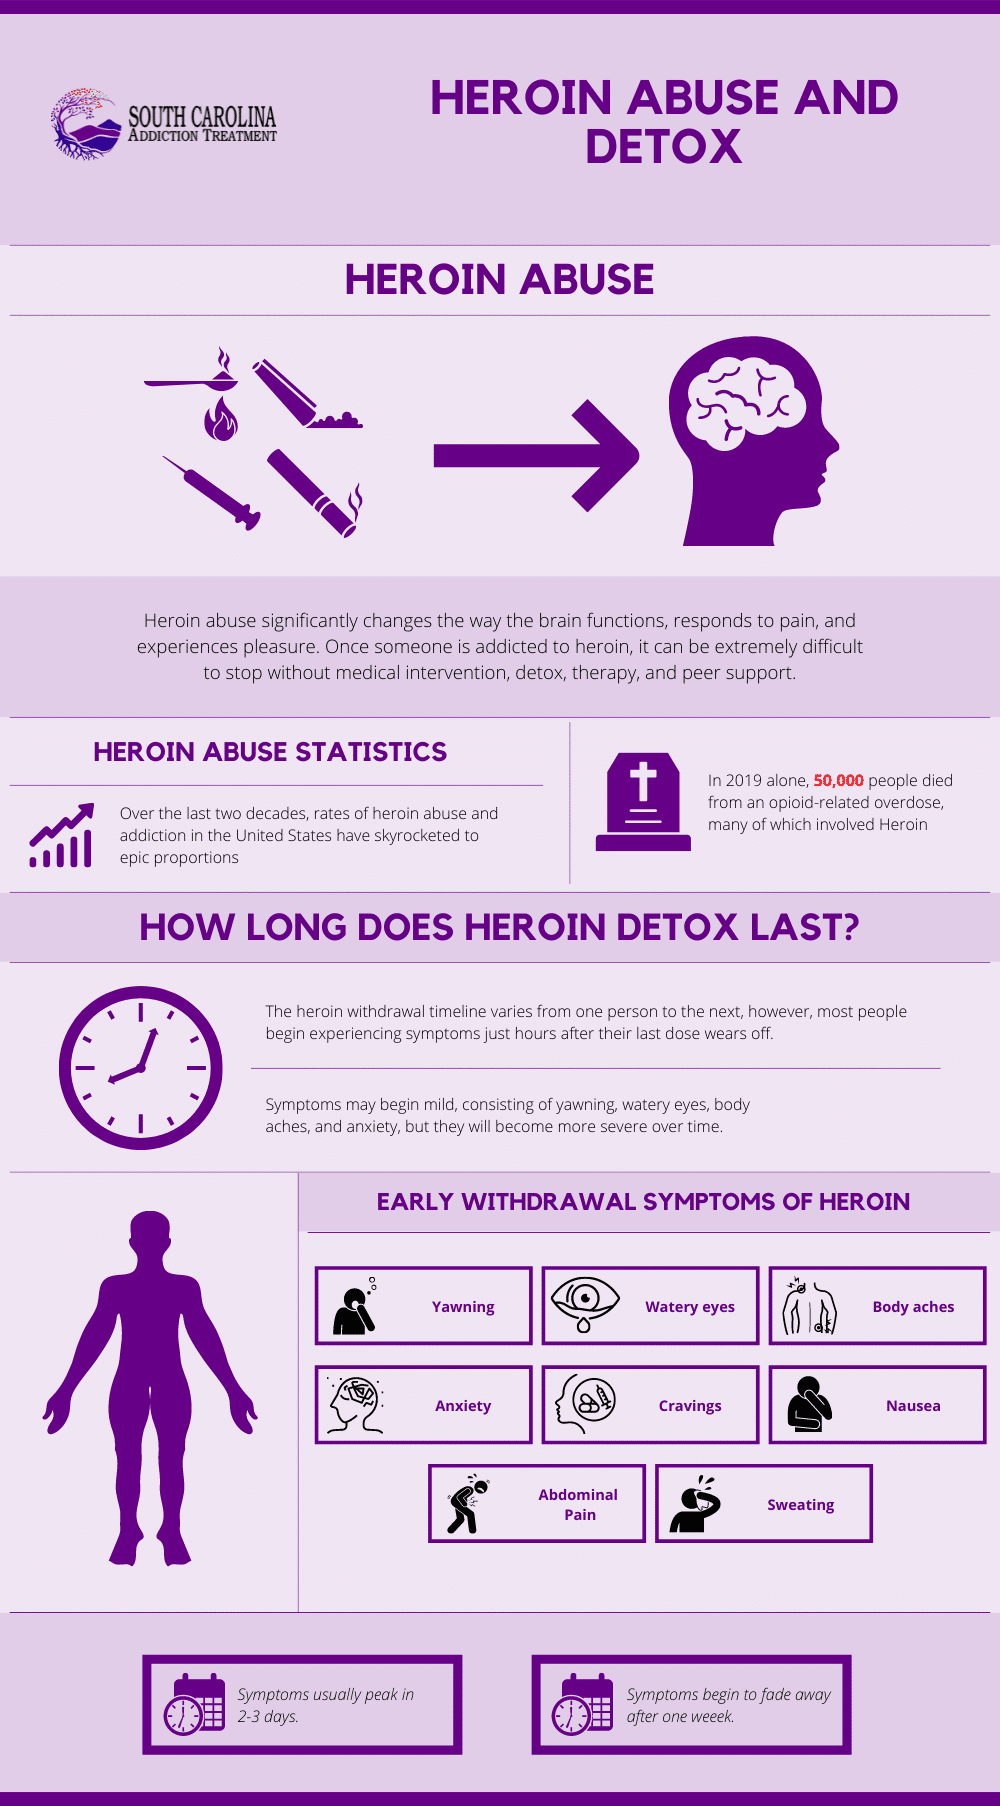 Heroin Abuse and Detox